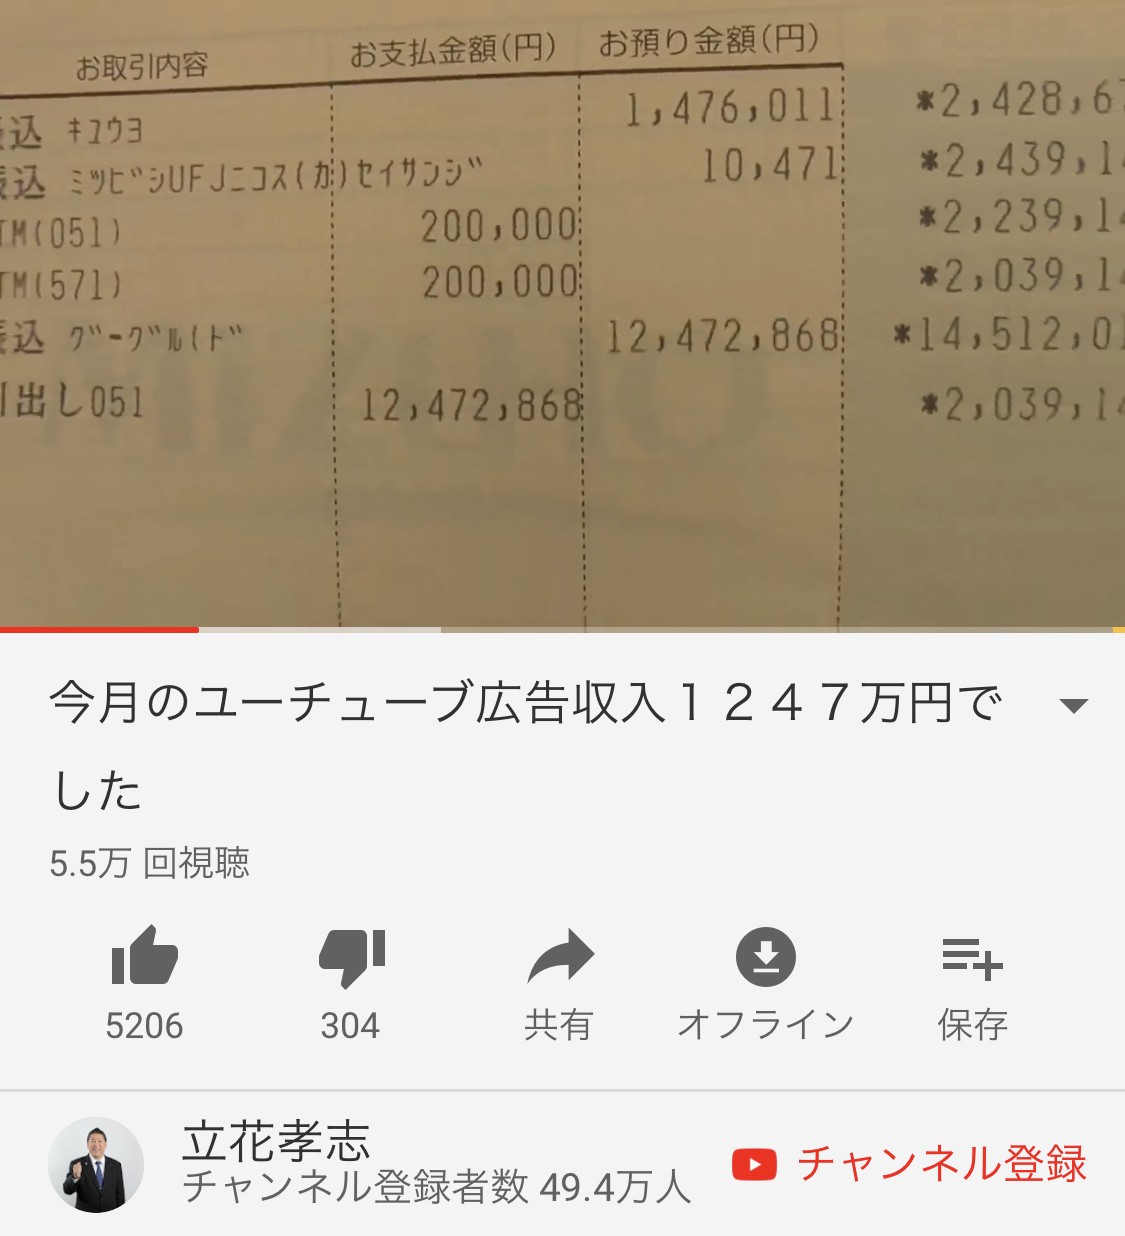 [N country] This month's YouTube advertising revenue of Tachibana is too dangerous, wwwwwwwww